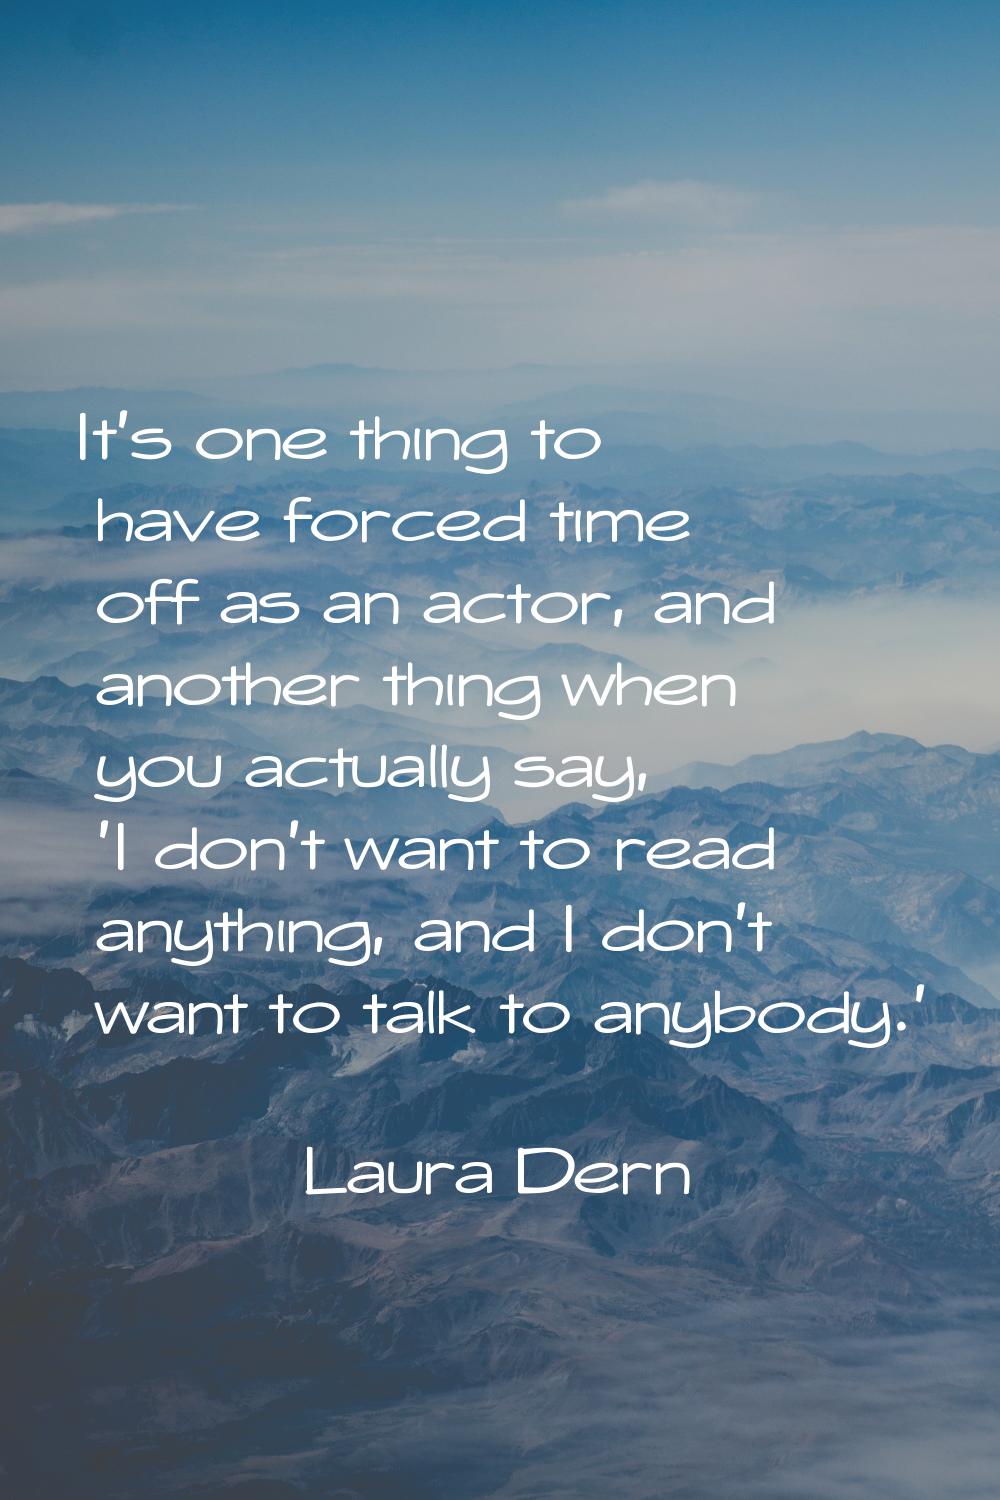 It's one thing to have forced time off as an actor, and another thing when you actually say, 'I don